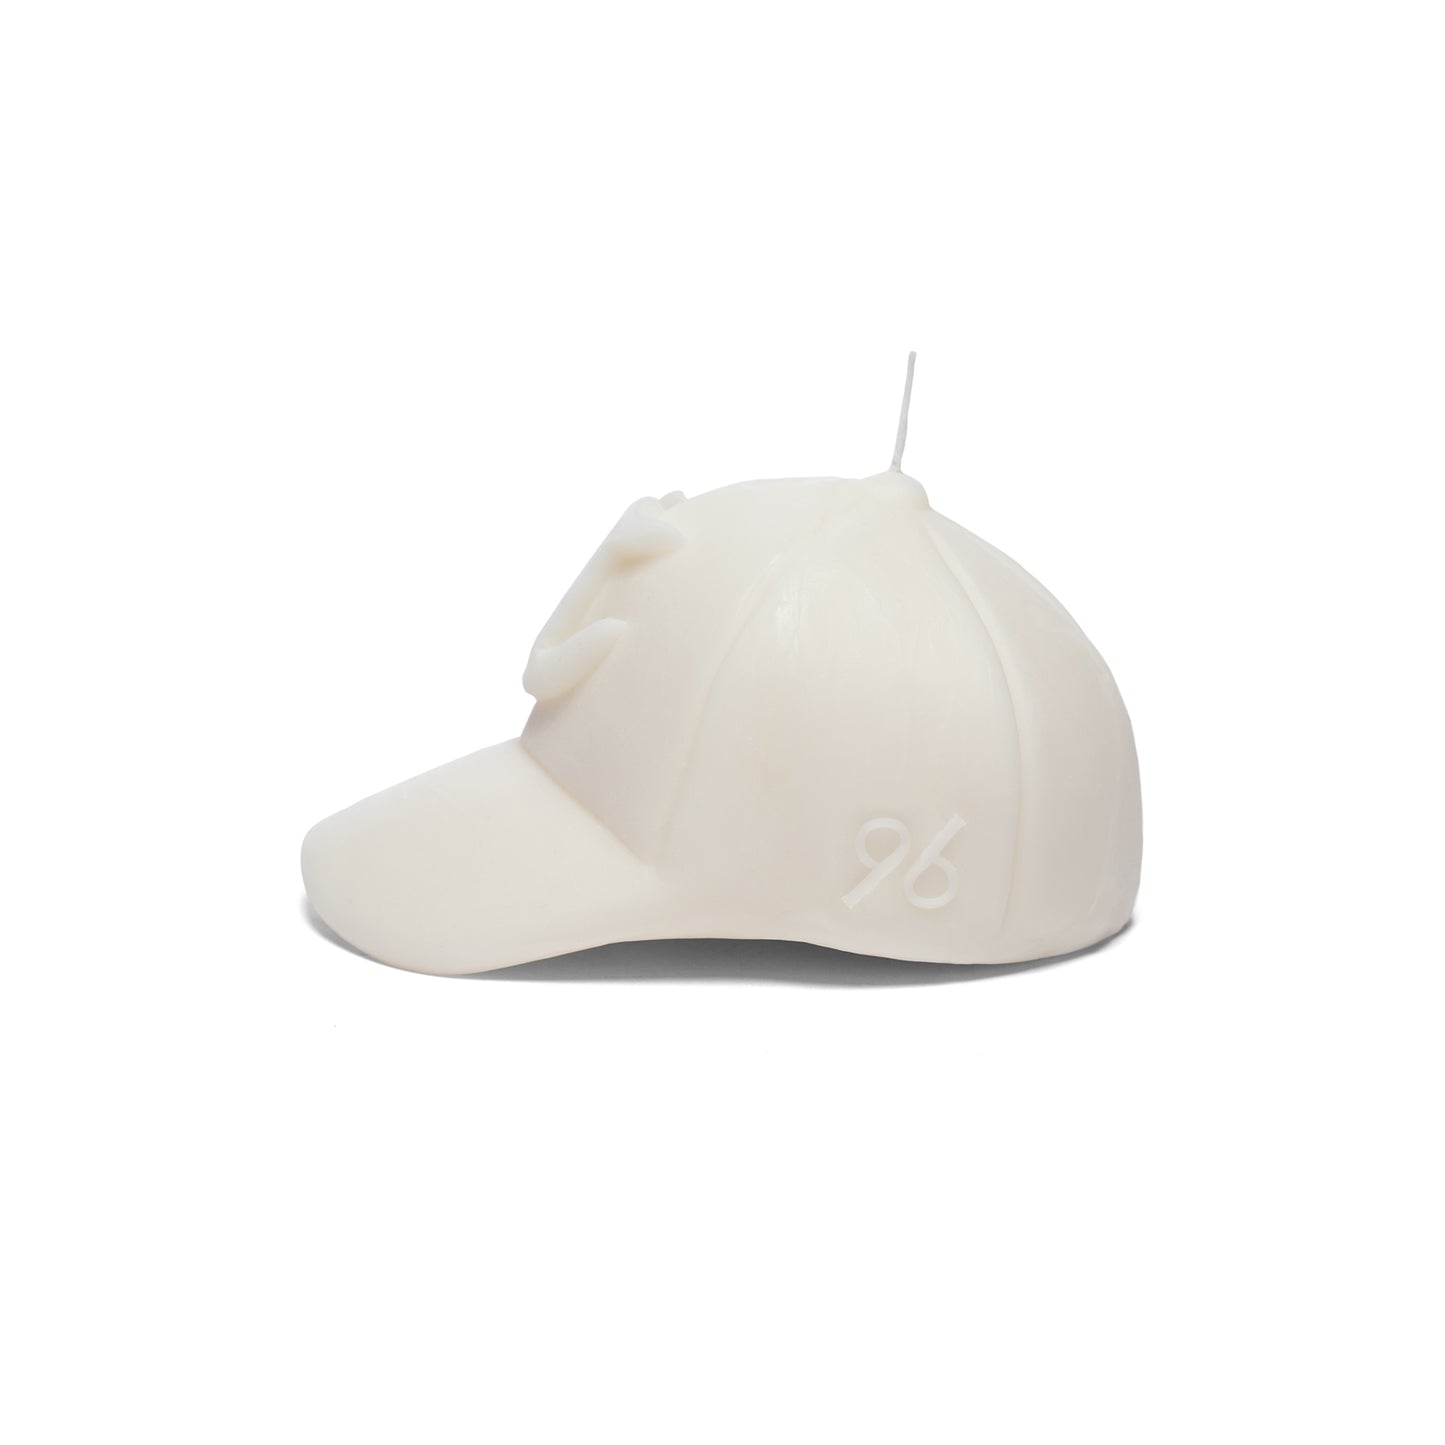 Concepts Headin' Home Ole' Cap Candle (White)